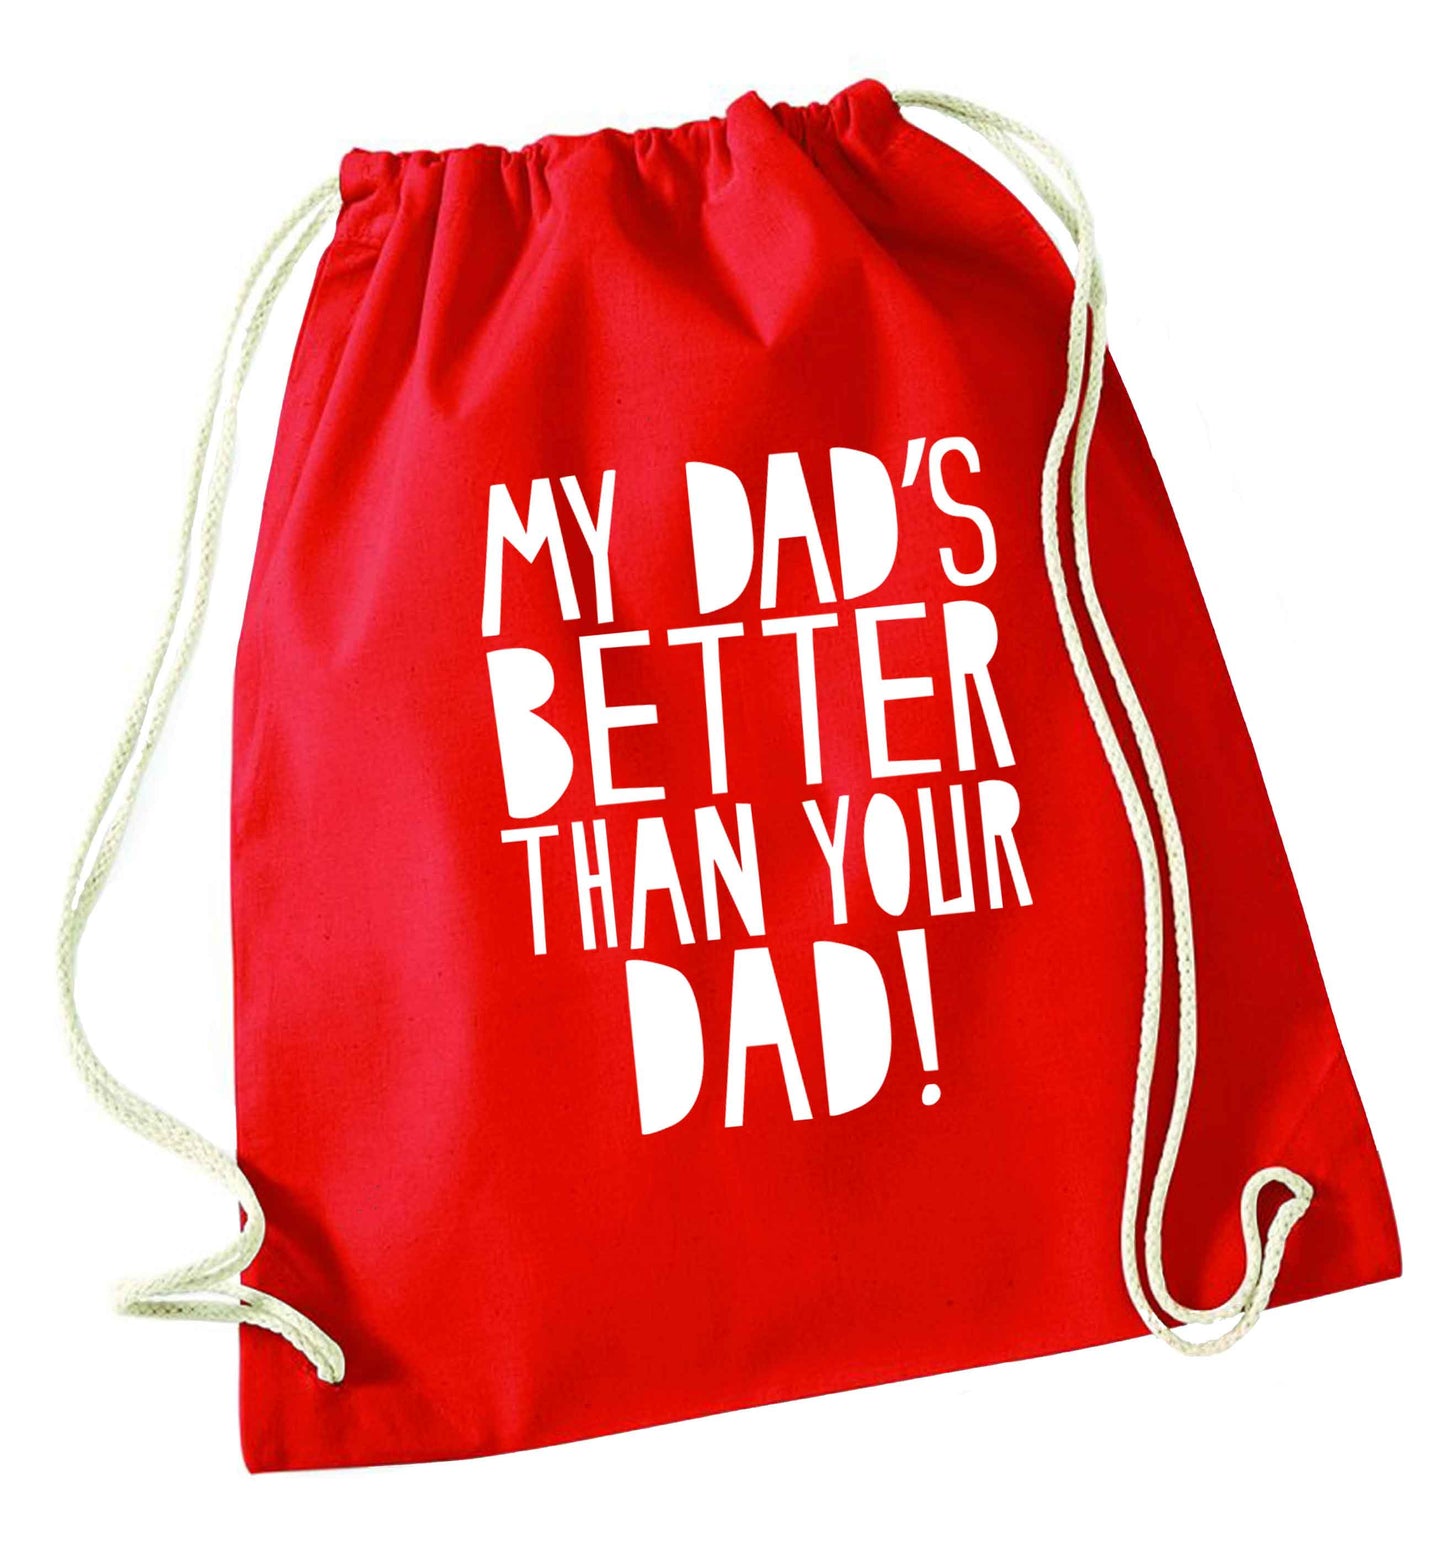 My dad's better than your dad! red drawstring bag 